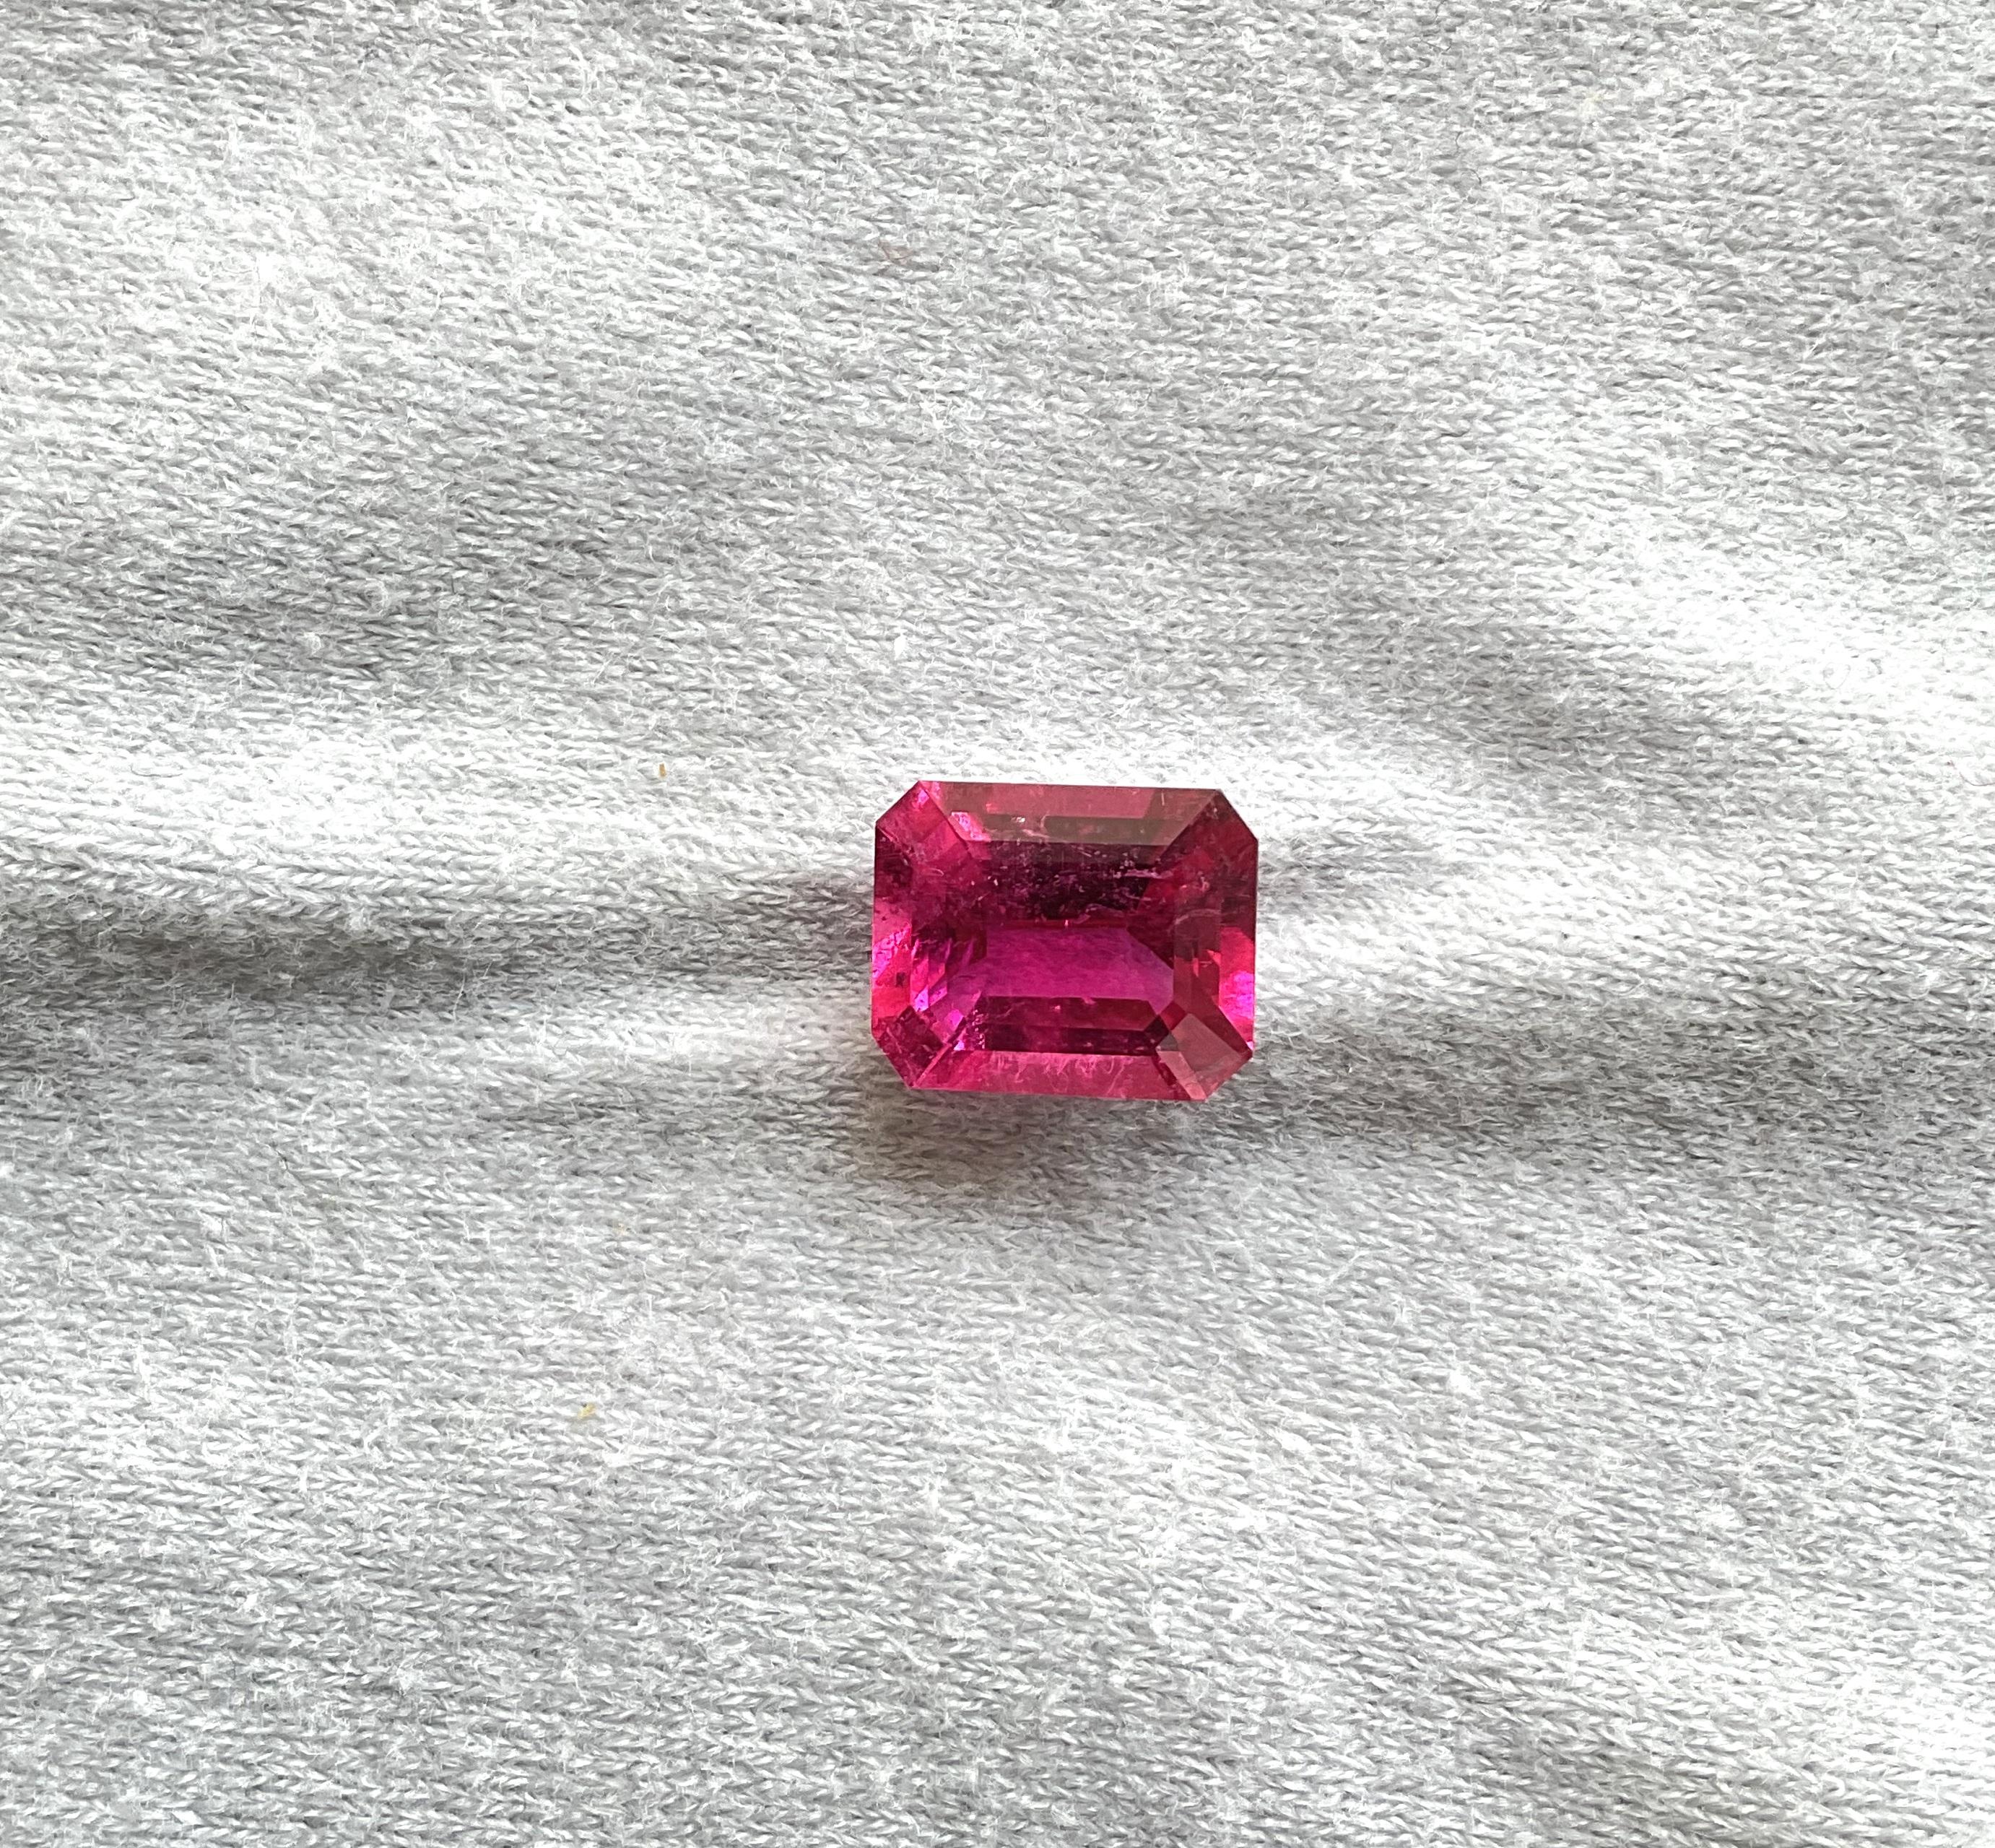 Contemporary 4.08 Carats Rubellite Tourmaline Octagon Cut Stone For Fine Jewelry Natural gem For Sale